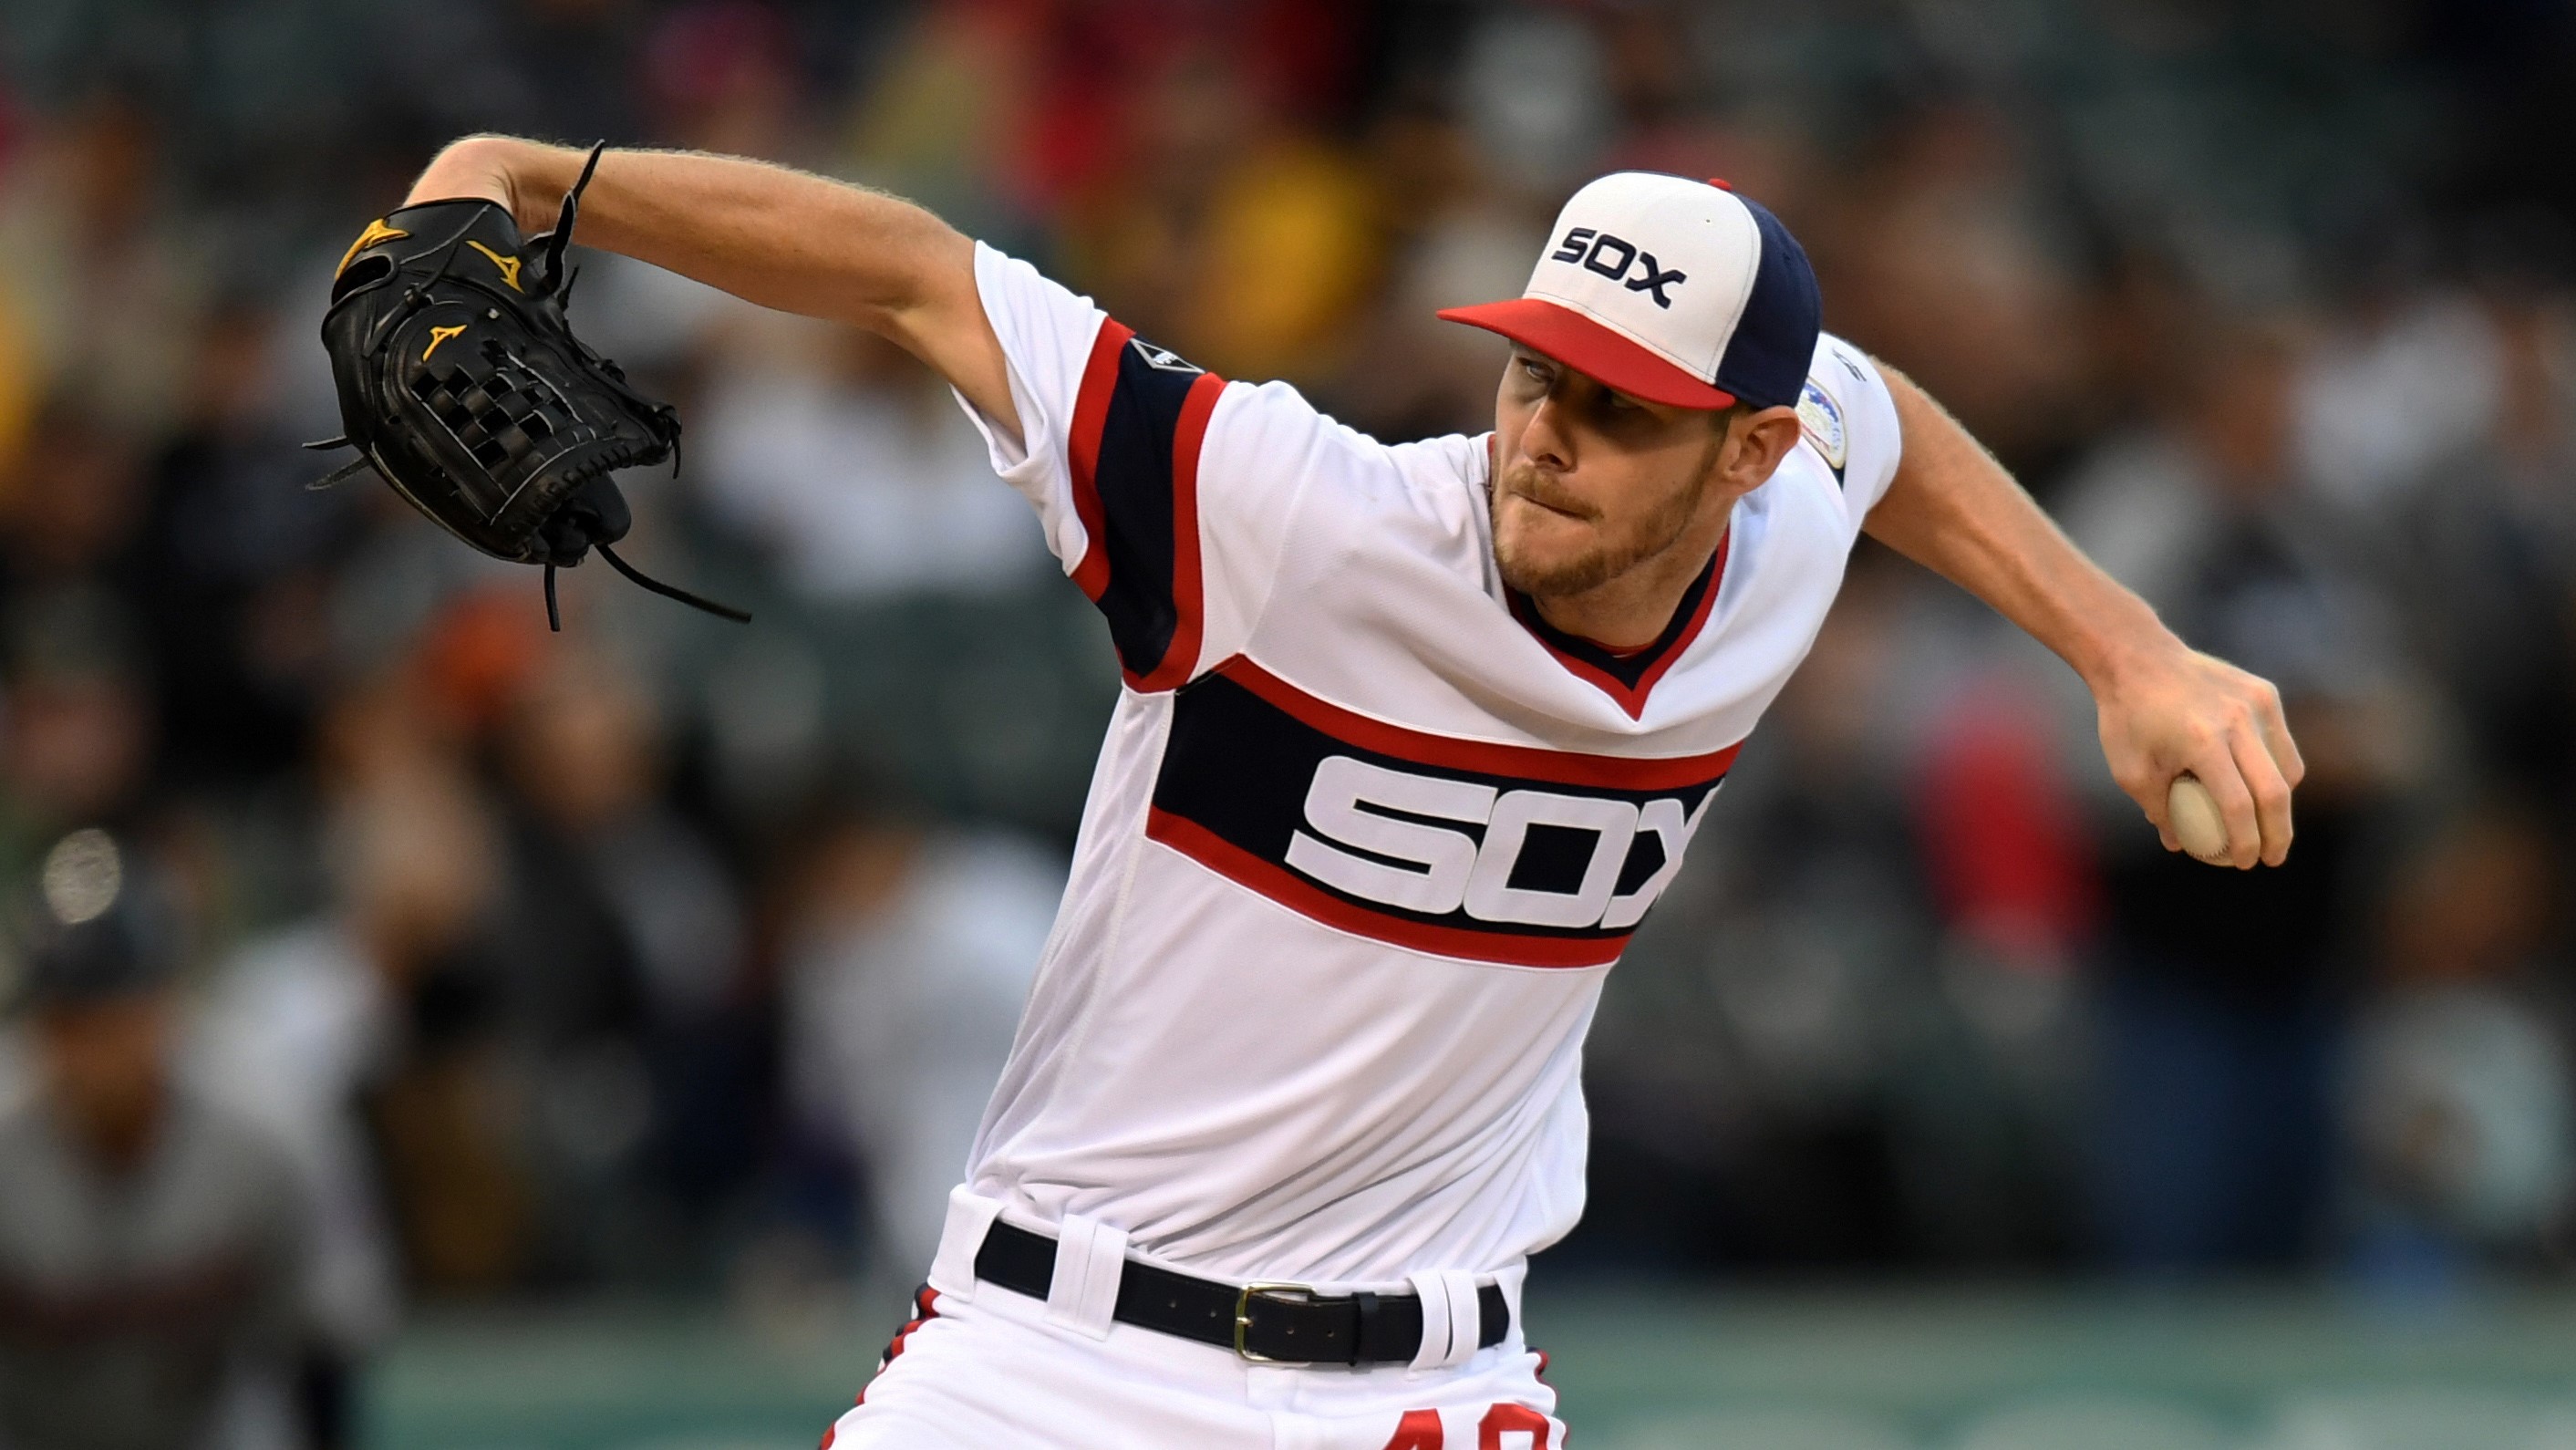 Chris Sale scratched after cutting up throwback uniforms - South Side Sox